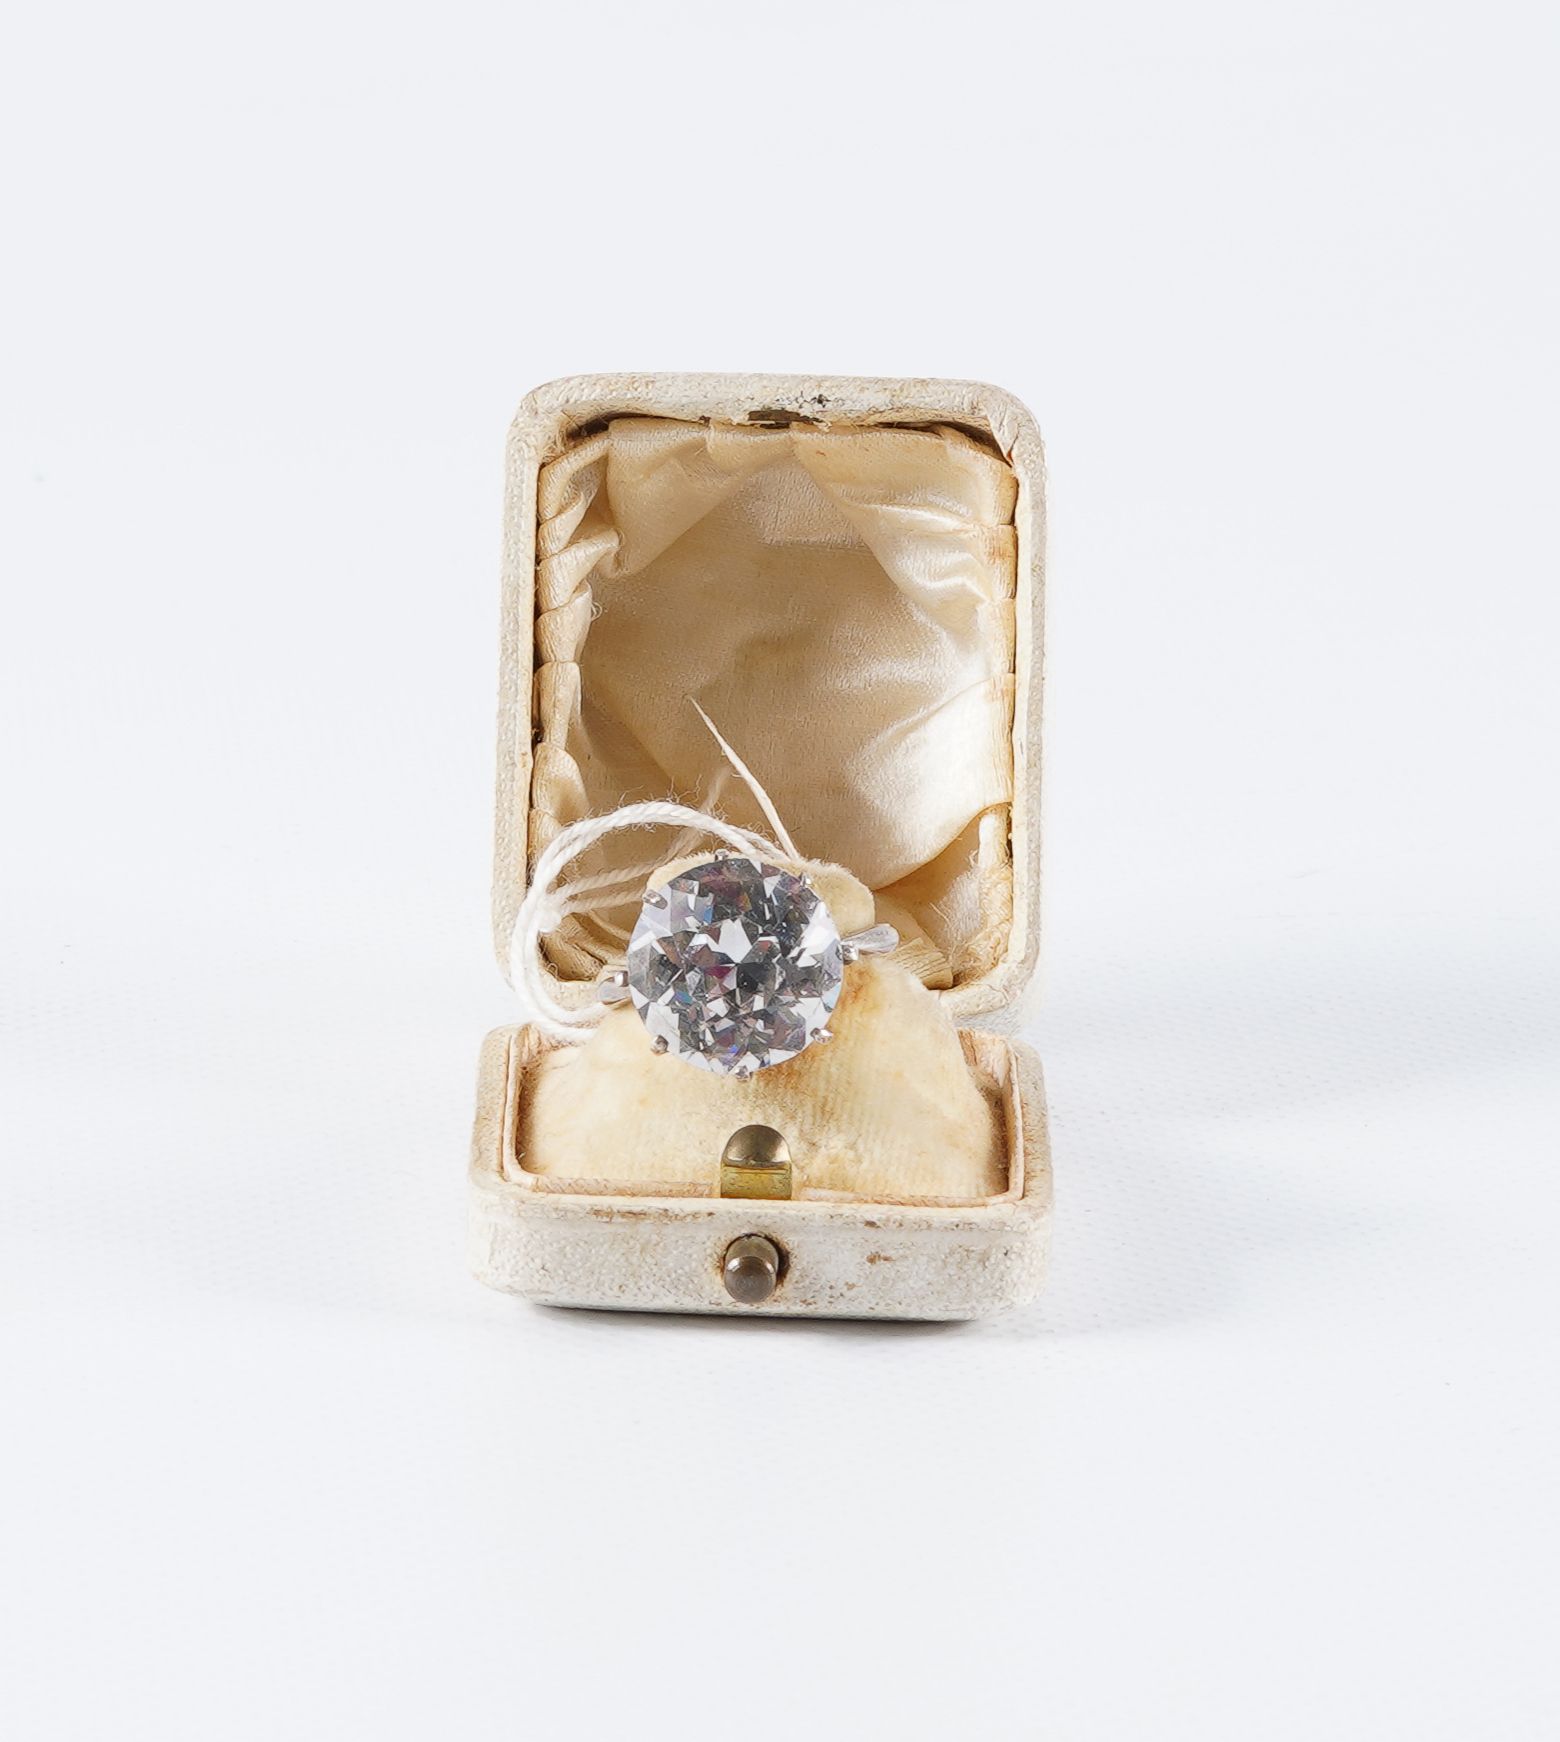 Bague Ring set with a stone. Case. Size 51. 4.04g gross